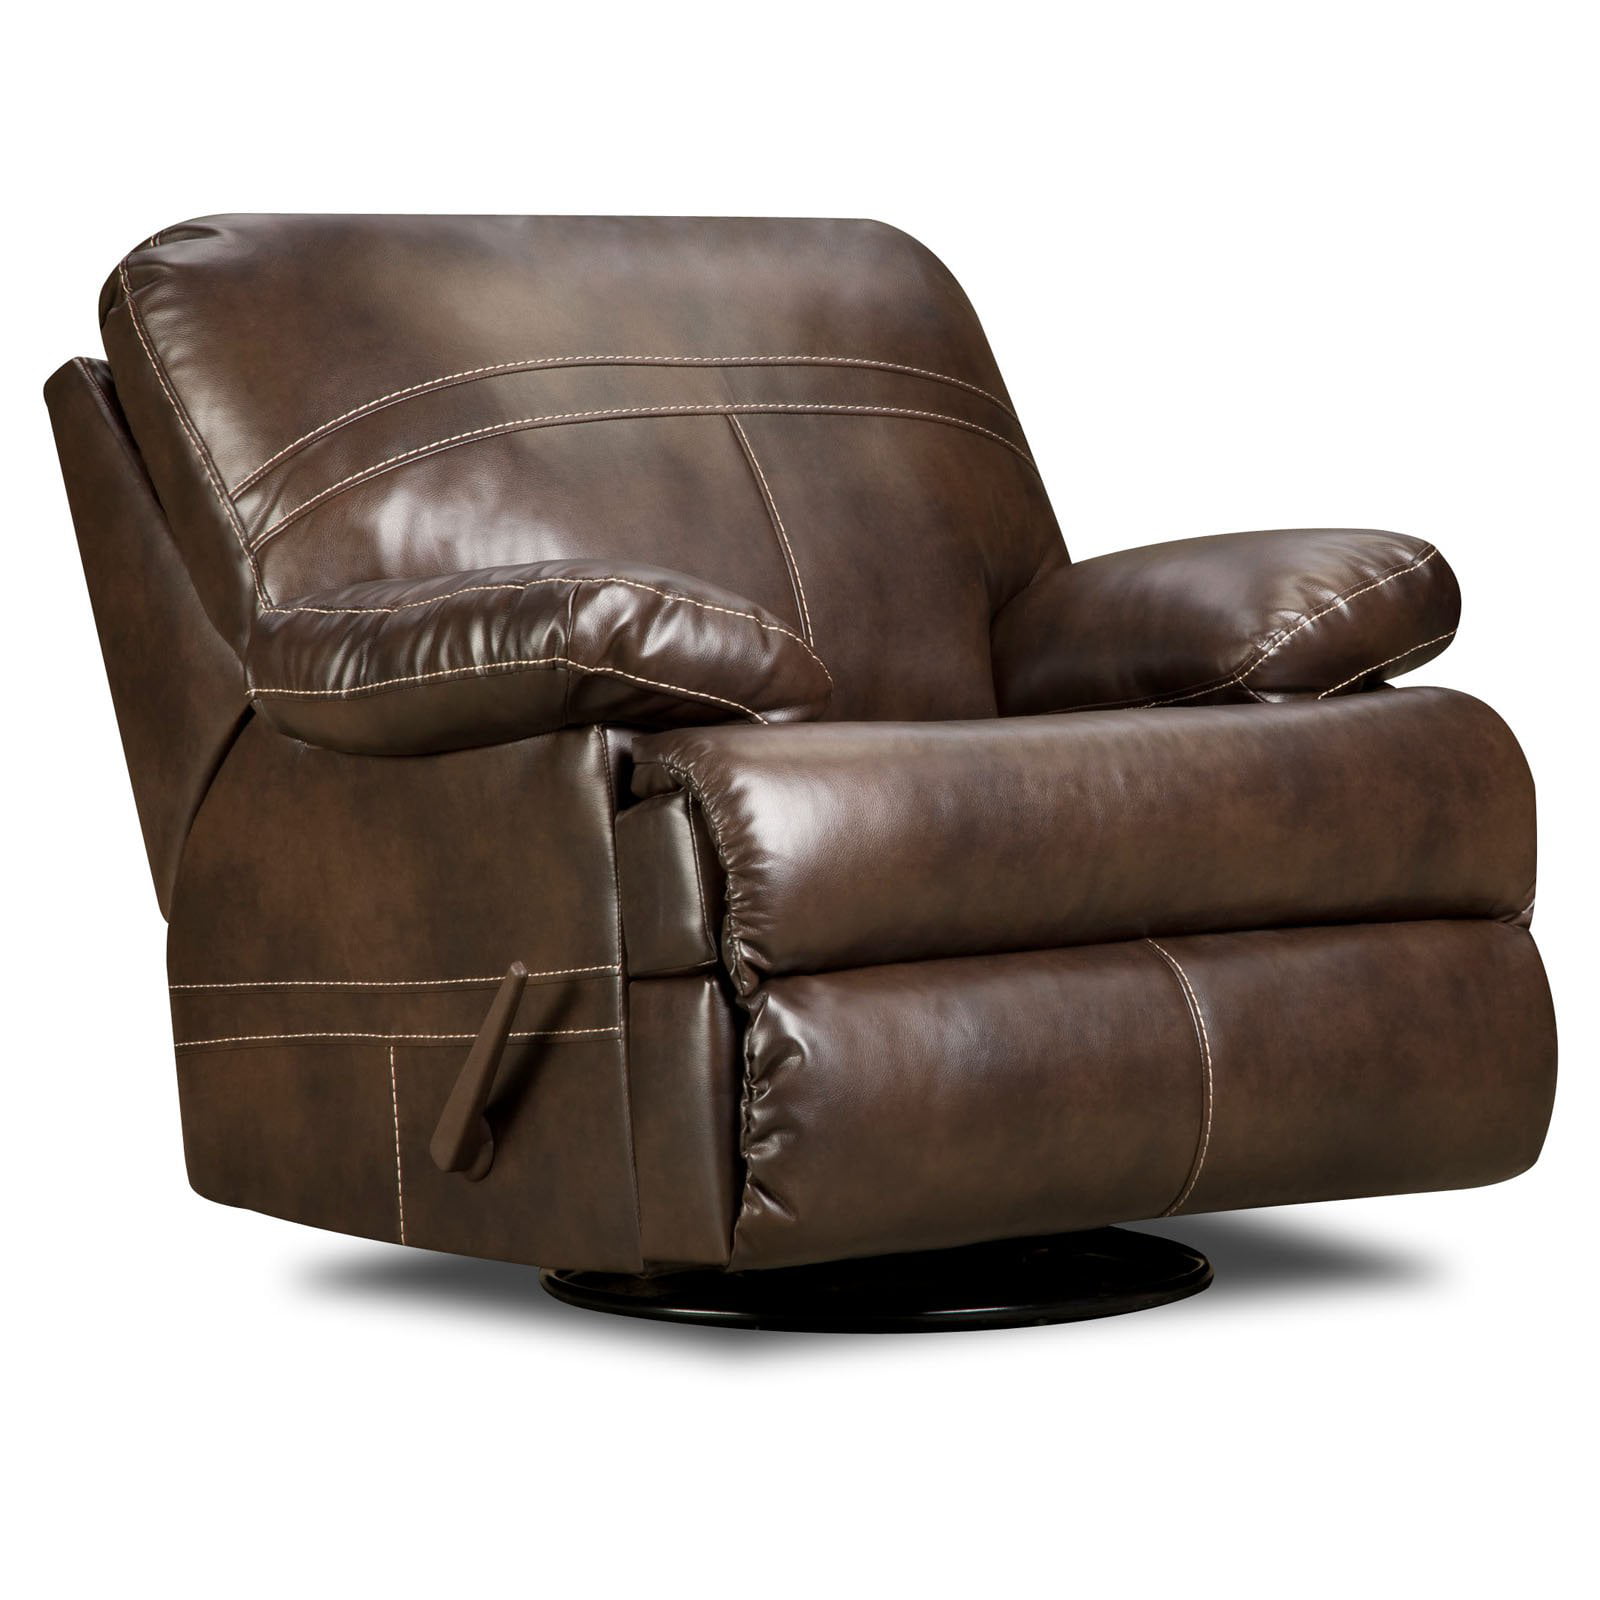 Simmons Miracle Bonded Leather Swivel, Simmons Leather Rocker Recliner